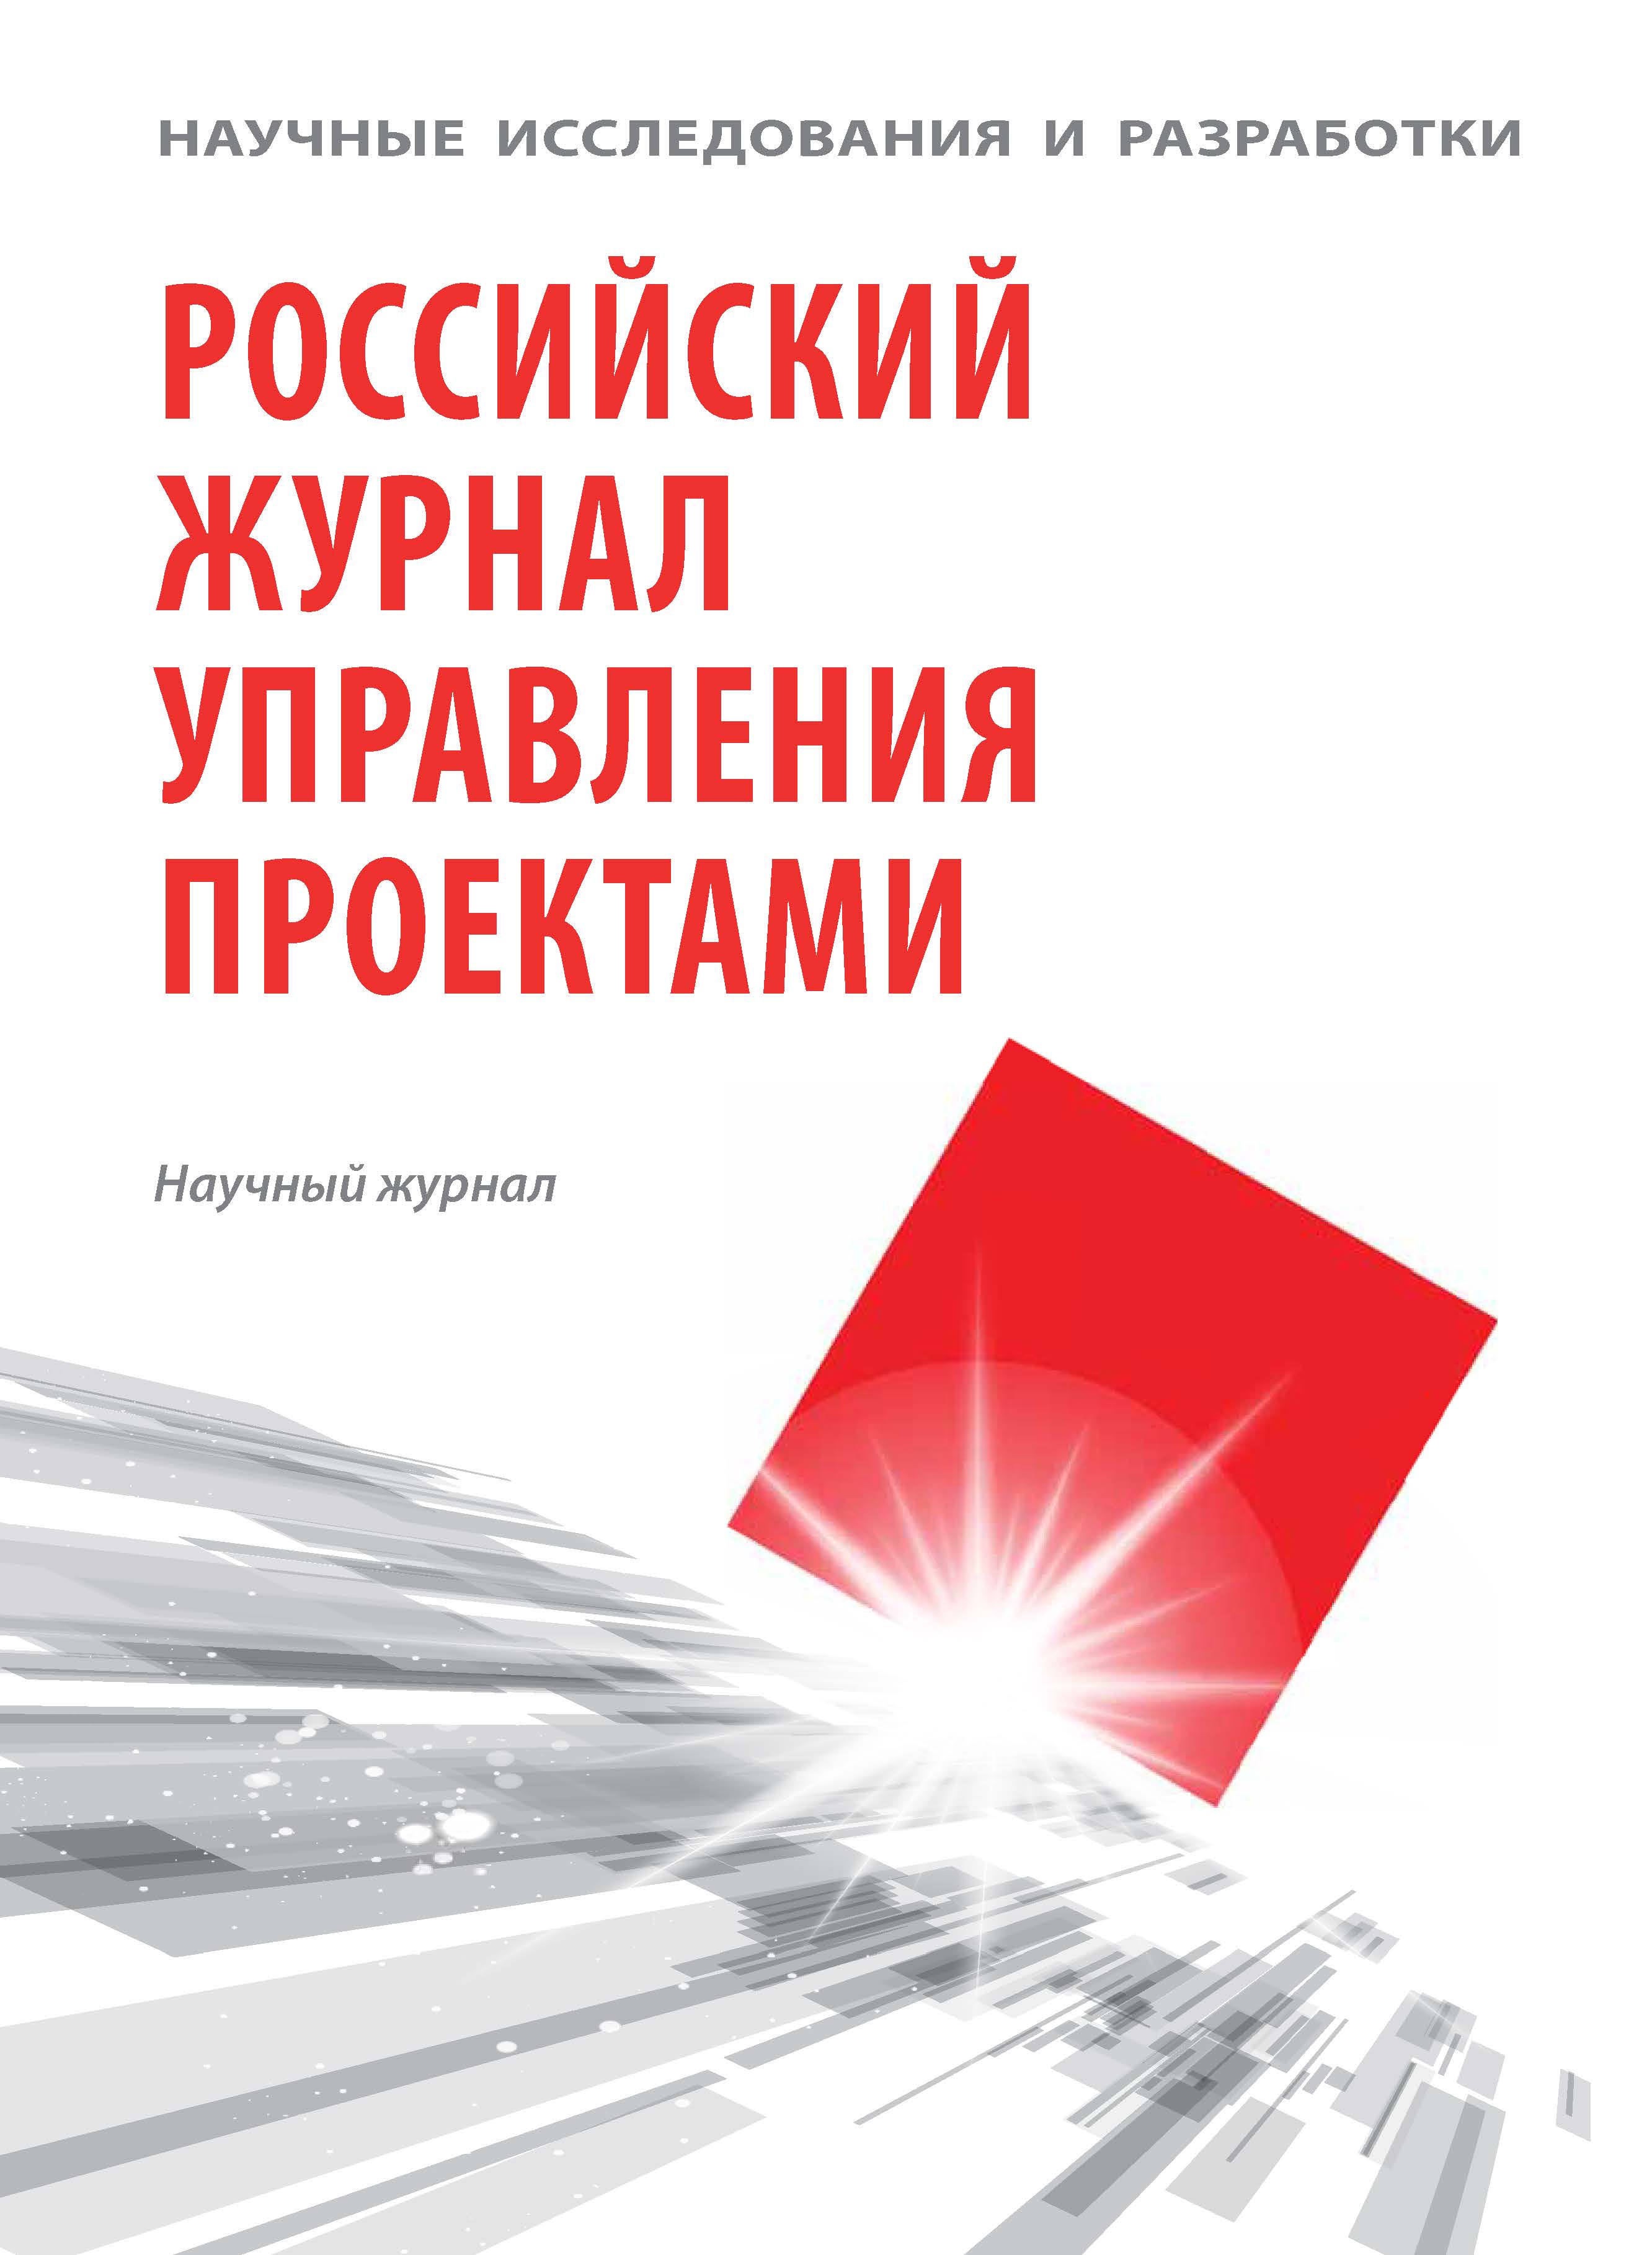                         Scientific Research and Development. Russian Journal of Project Management
            